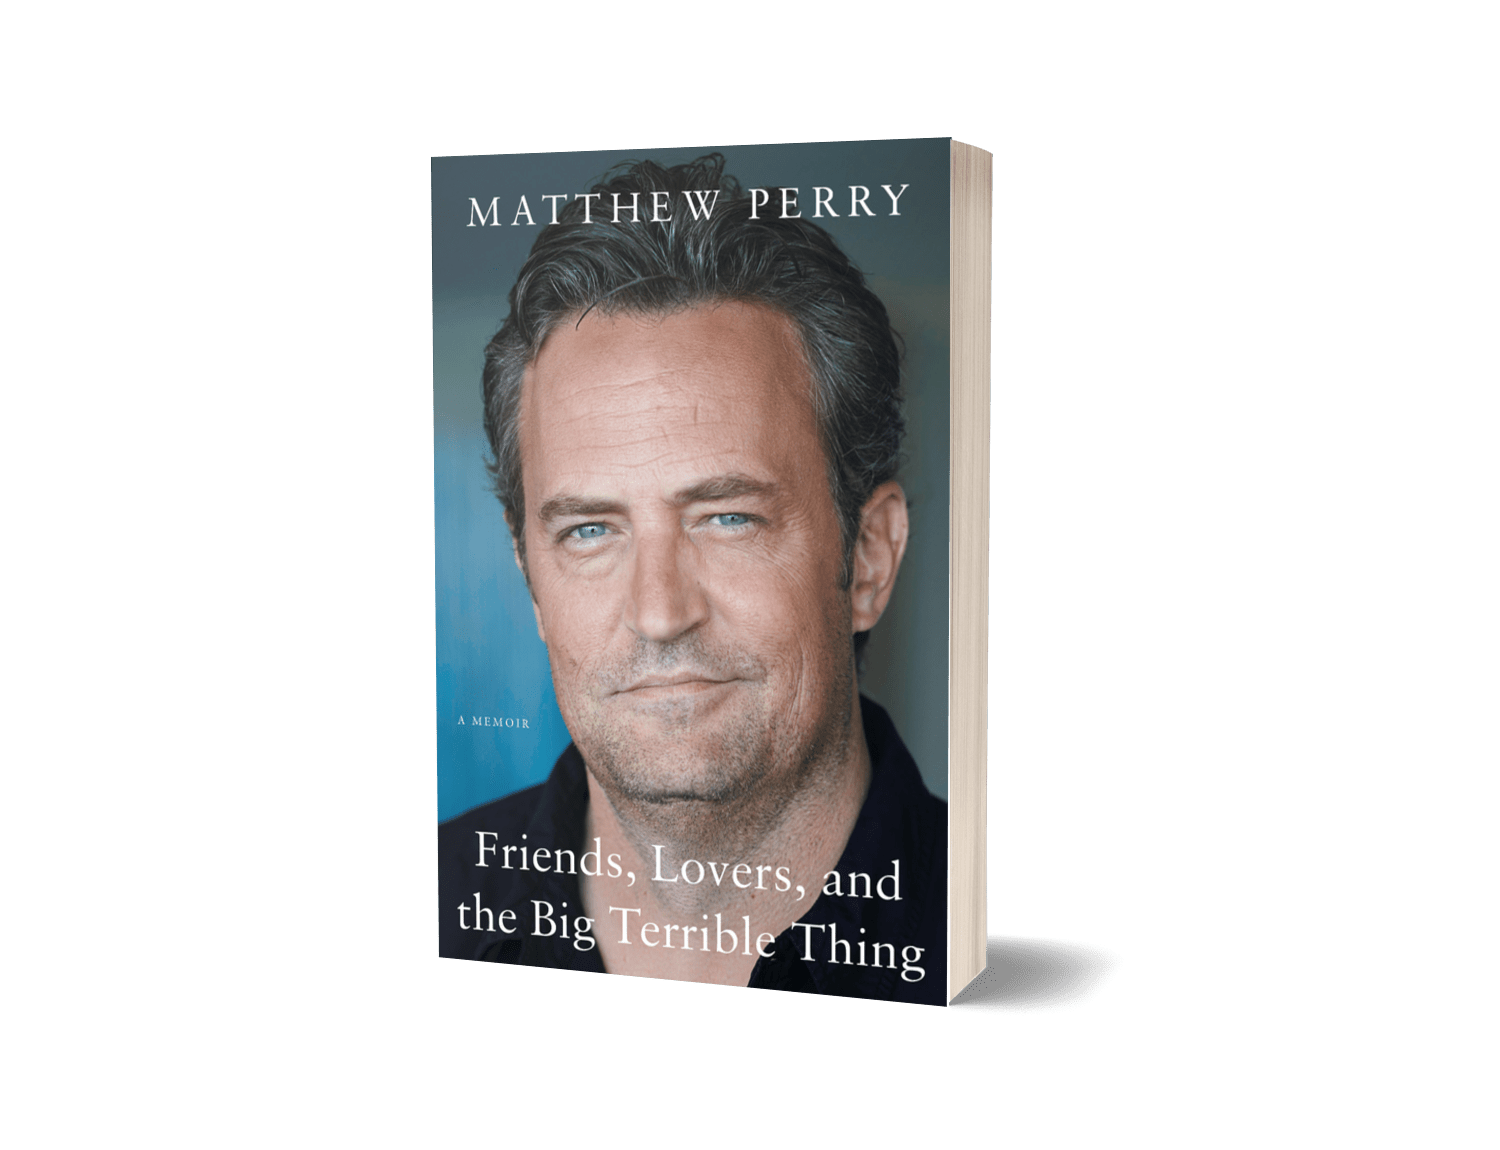 Friends, Lovers, and the Big Terrible Thing: A Memoir Book by Matthew Perry